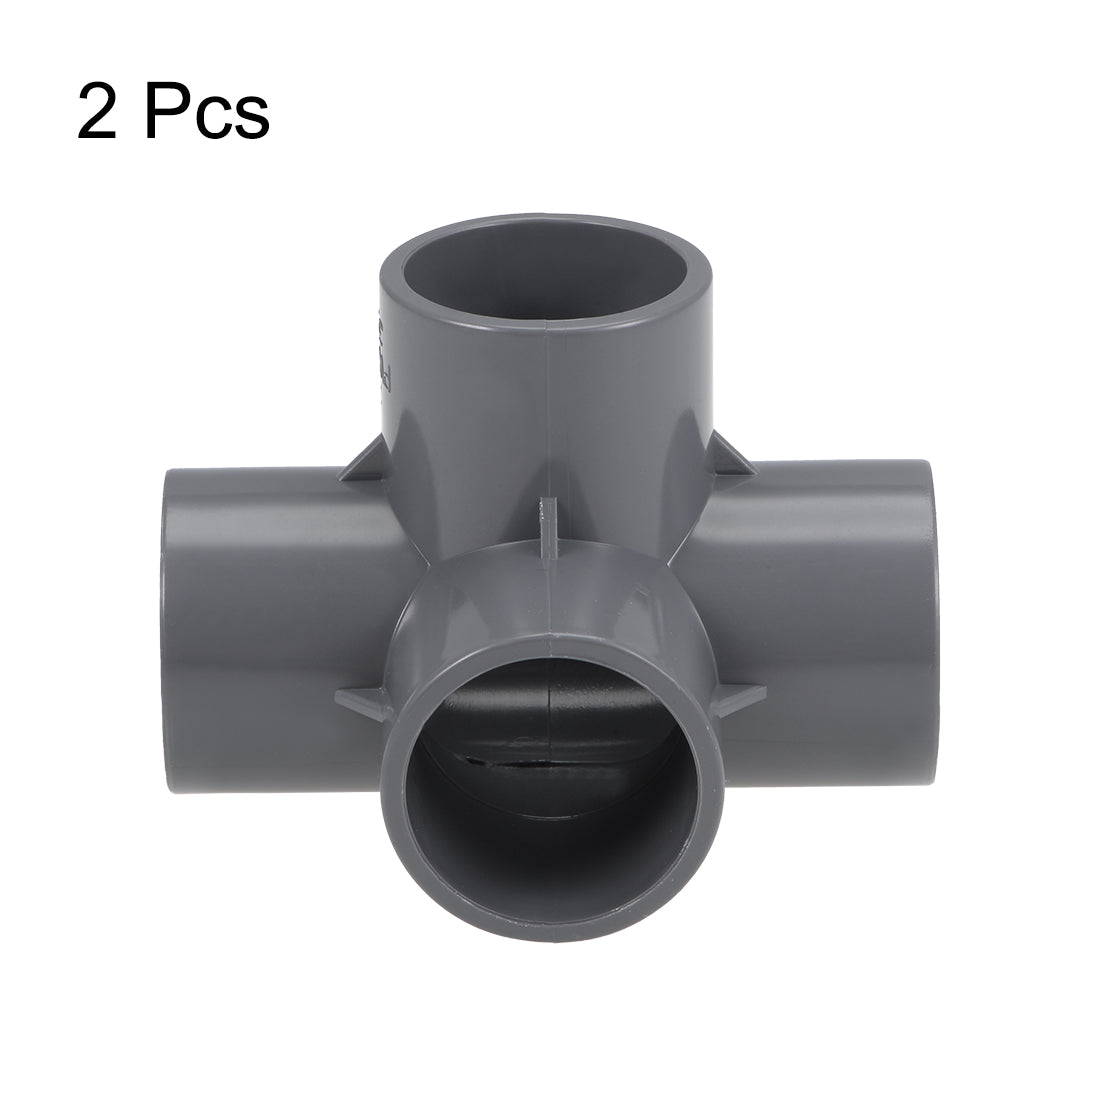 uxcell Uxcell 4 Way 32mm Tee Metric PVC Fitting Elbow - PVC Furniture - PVC Elbow Fittings Gray 2Pcs